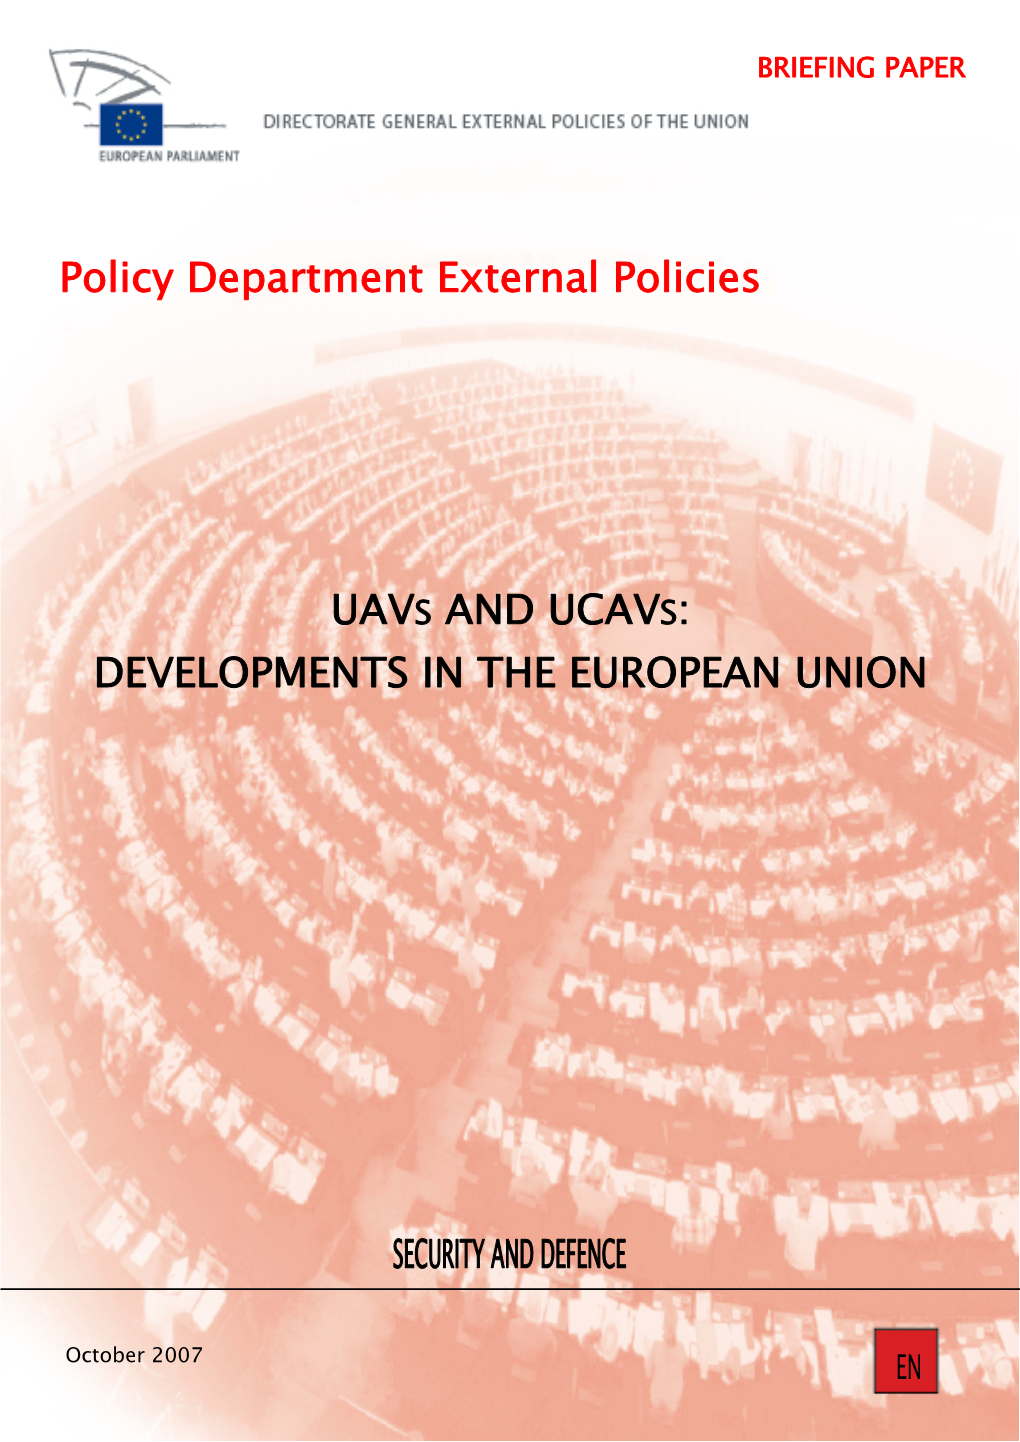 Uavs and Ucavs: Developments in the European Union